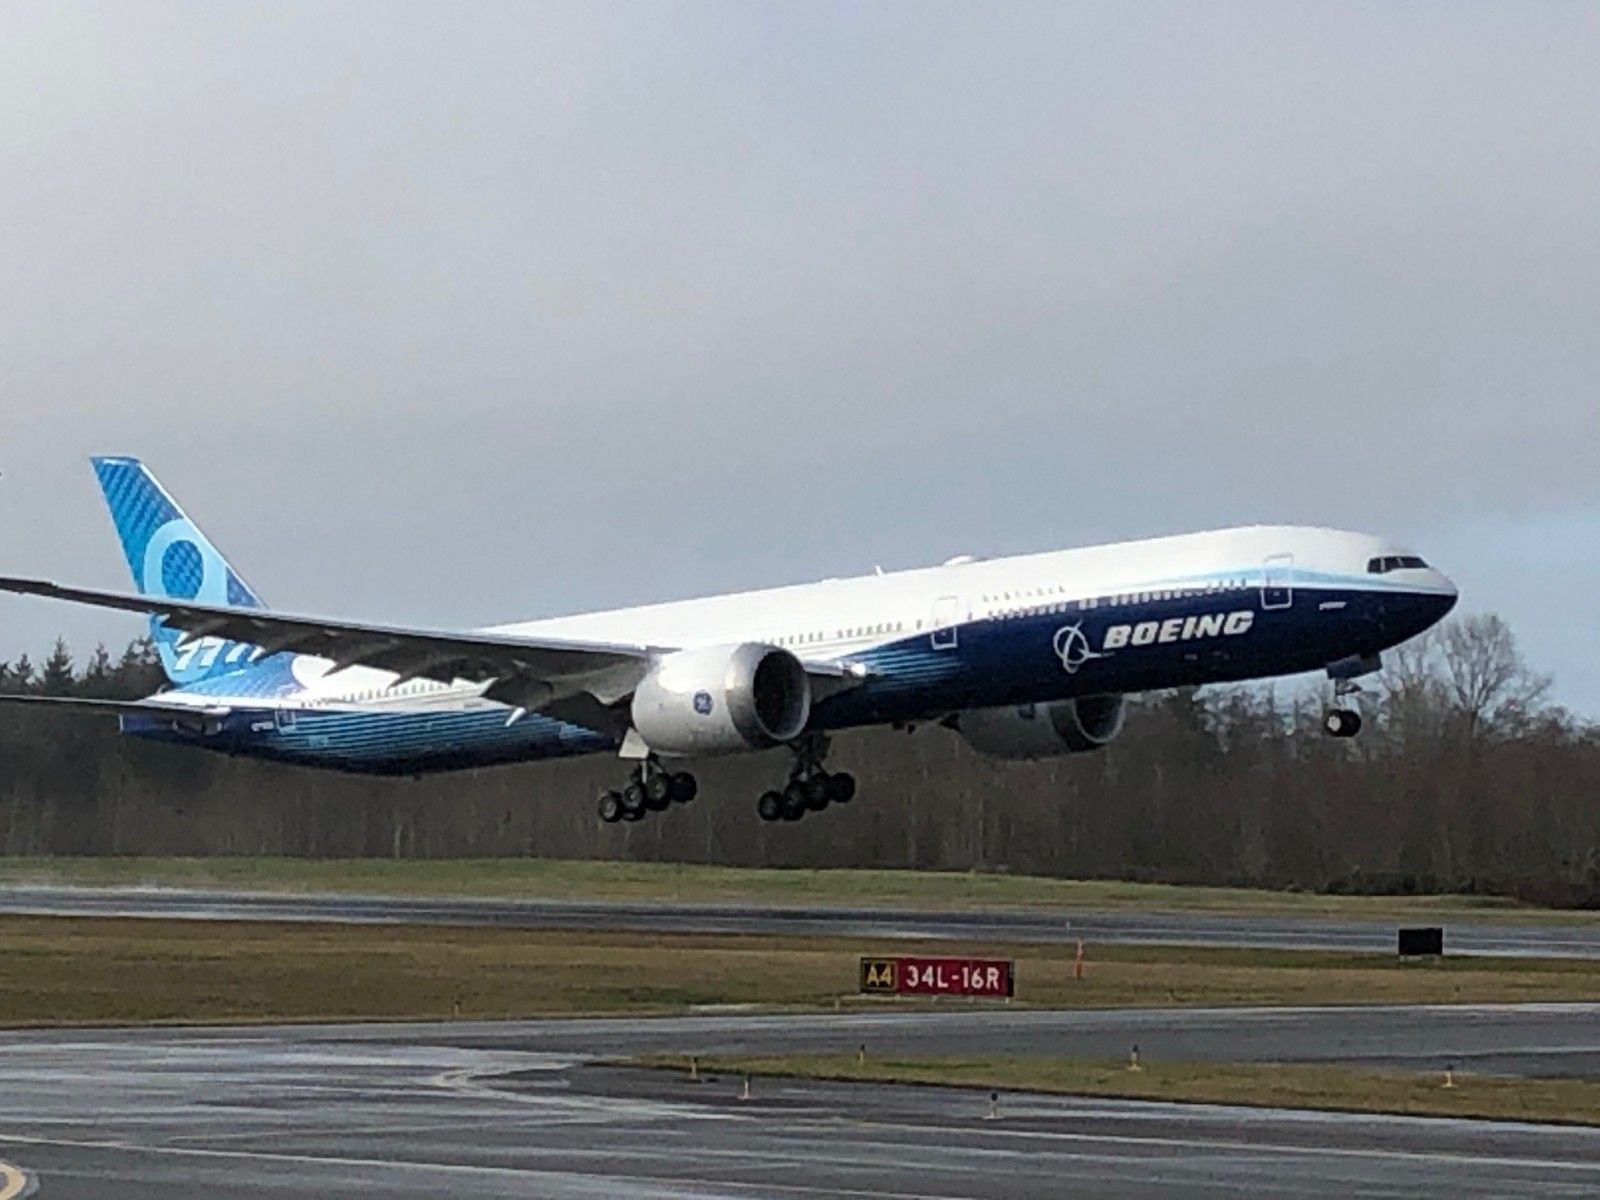 Boeing 777X News: Boeing Latest Jet Has Lifted Off for the First Time